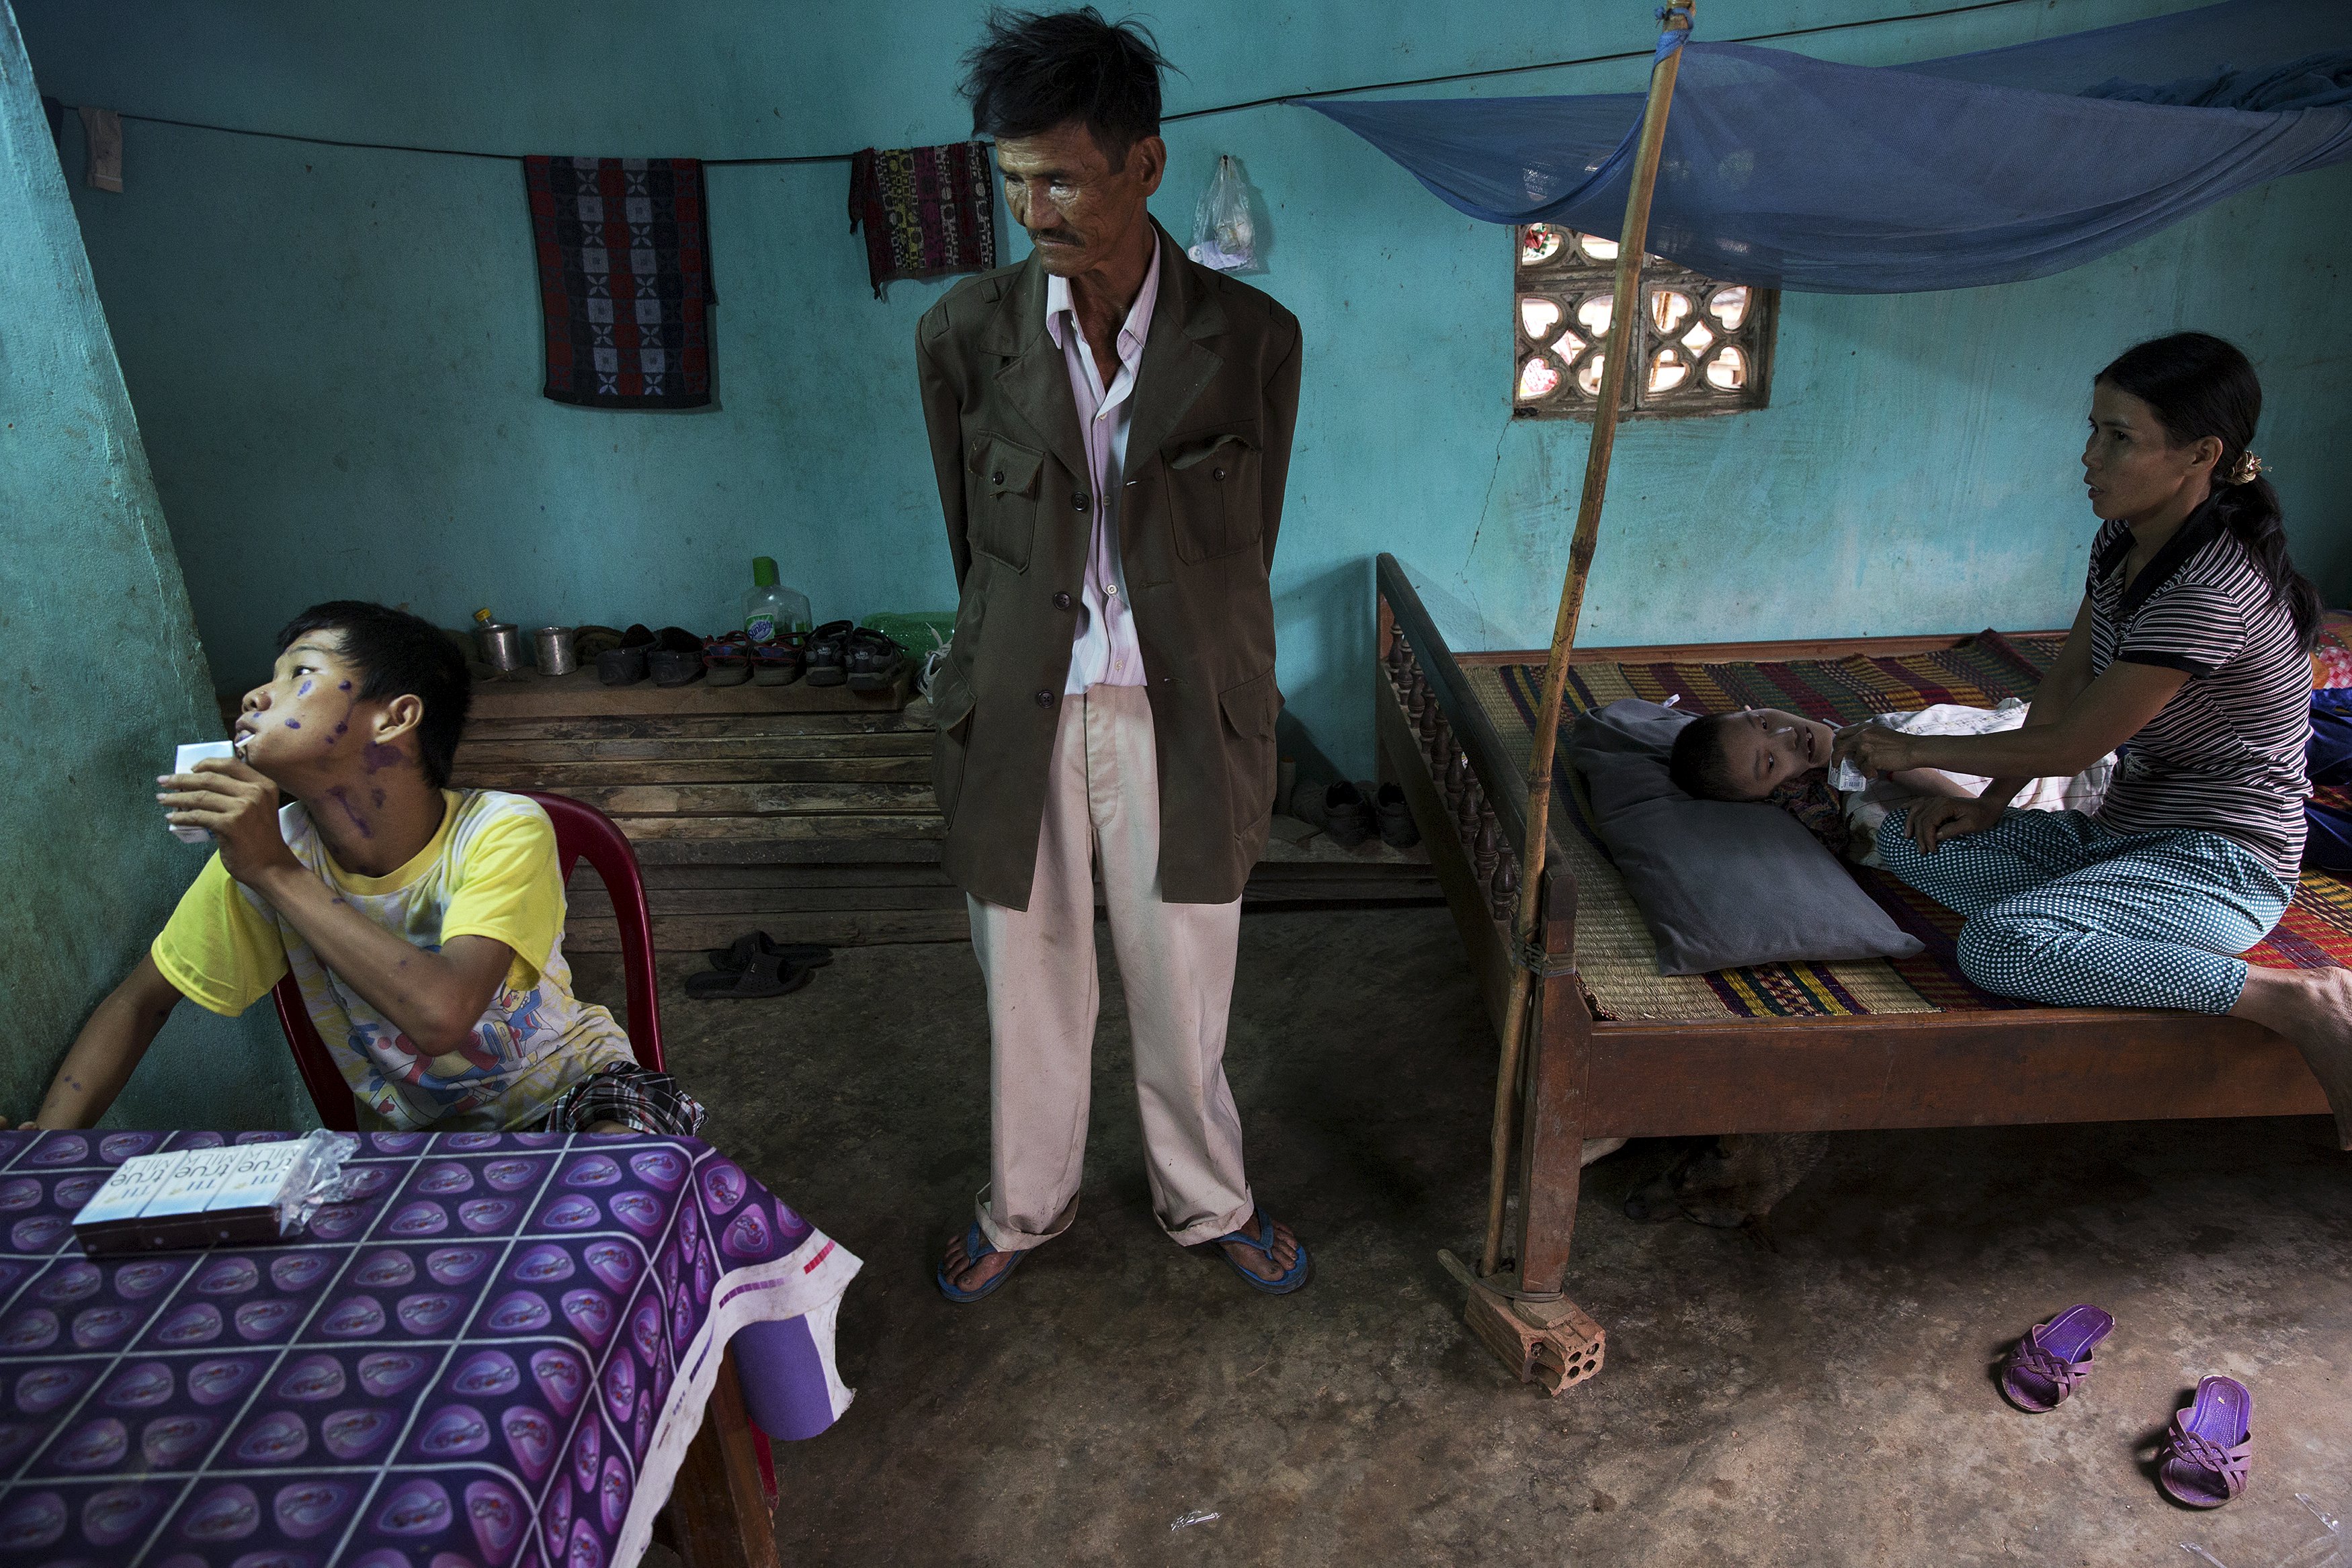 Le Van Dan (C) looks at his disabled grandson Le Van Tam (L) as his daughter feeds another sick grandson in their family house in Phuoc Thai village, outside Danang April 12, 2015. Le Van Dan, a former artillery soldier, said he was exposed to Agent Orange more than once, including being directly sprayed by U.S. planes near his village before he joined the military. Health officials confirmed two of his grandsons’ disabilities are due to his exposure to the defoliant, Le Van Dan said.